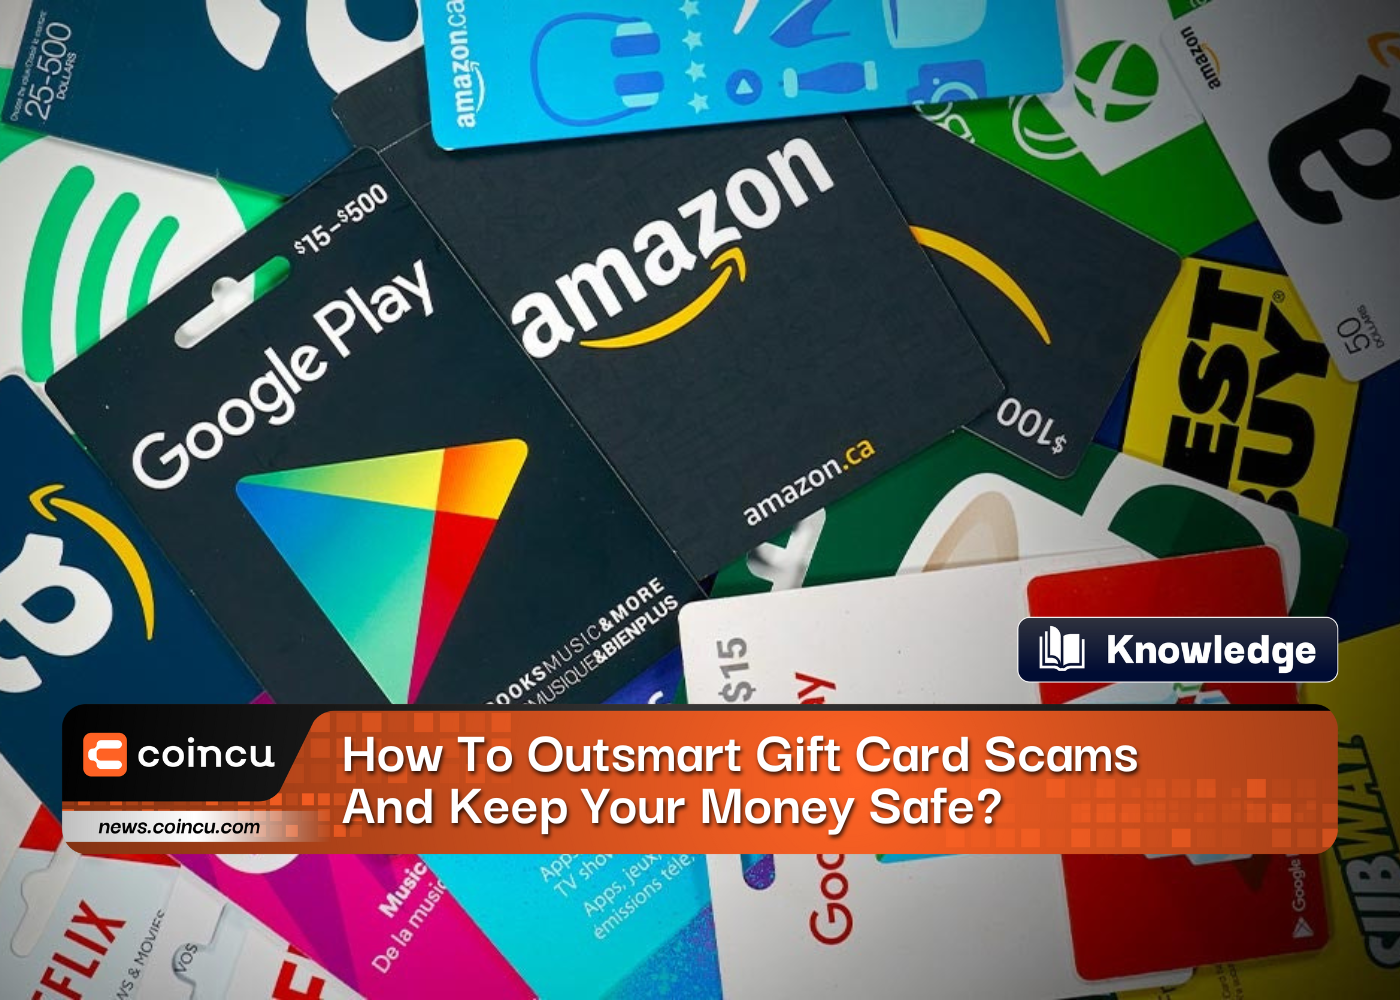 How To Outsmart Gift Card Scams